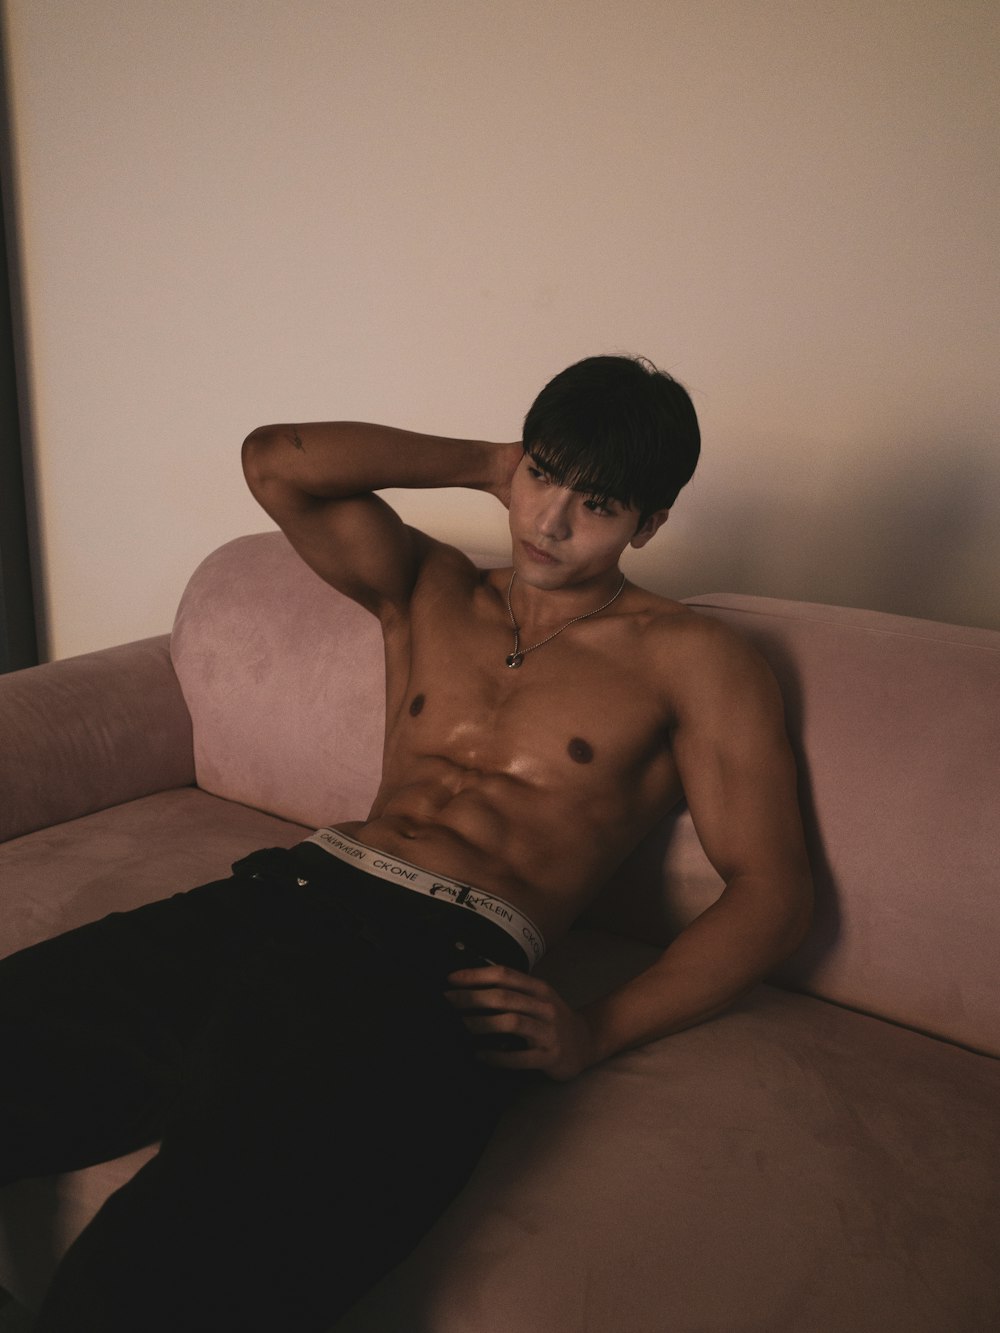 a shirtless young man sitting on a couch